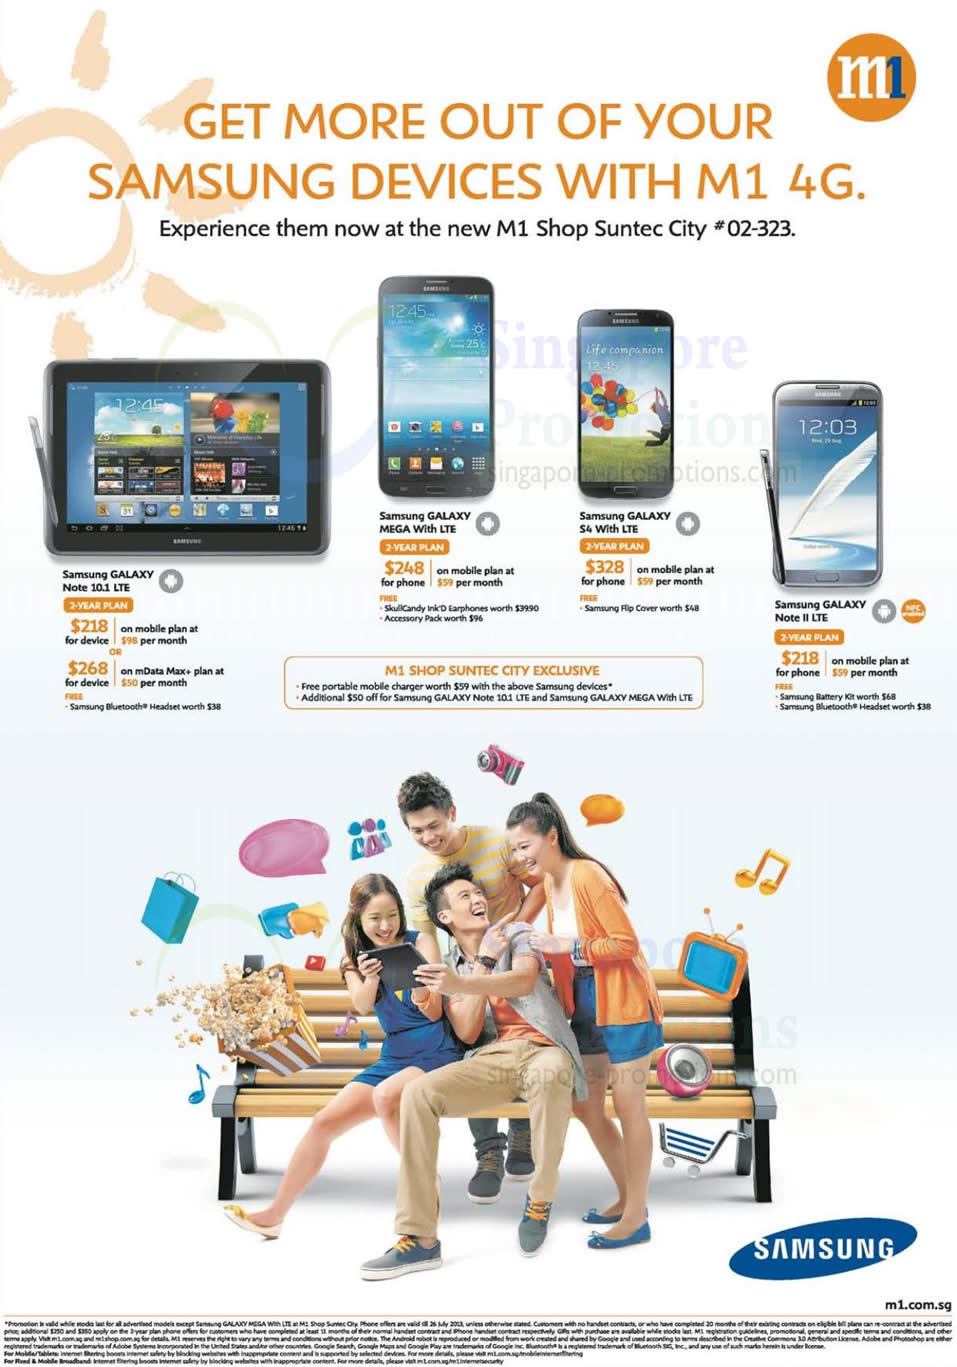 Featured image for M1 Smartphones, Tablets & Home/Mobile Broadband Offers 20 - 26 Jul 2013